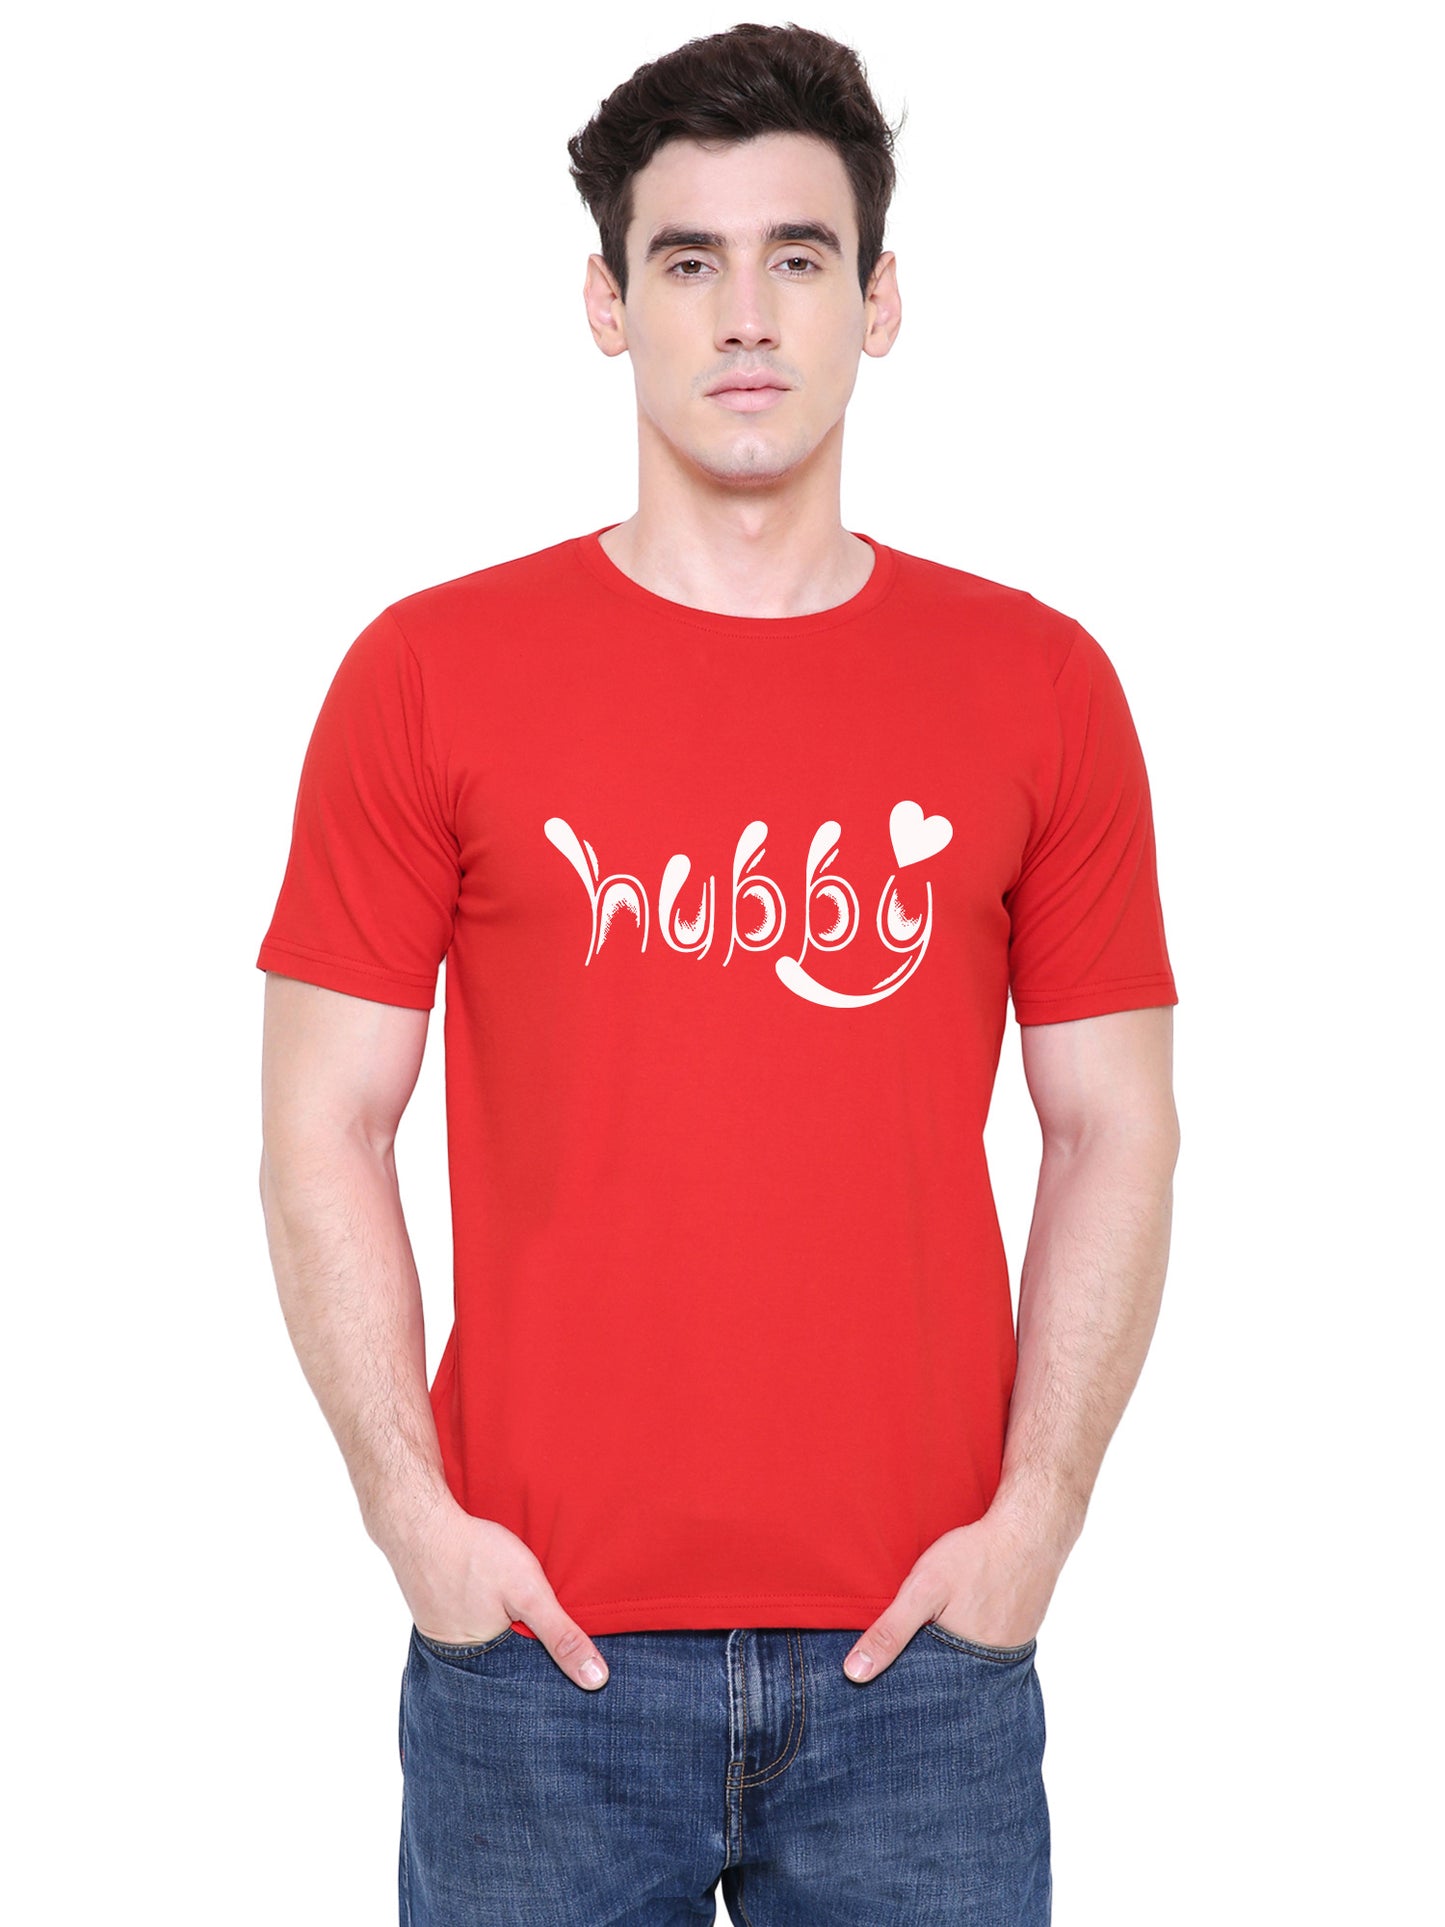 Hubby Wifey matching Couple T shirts- Red